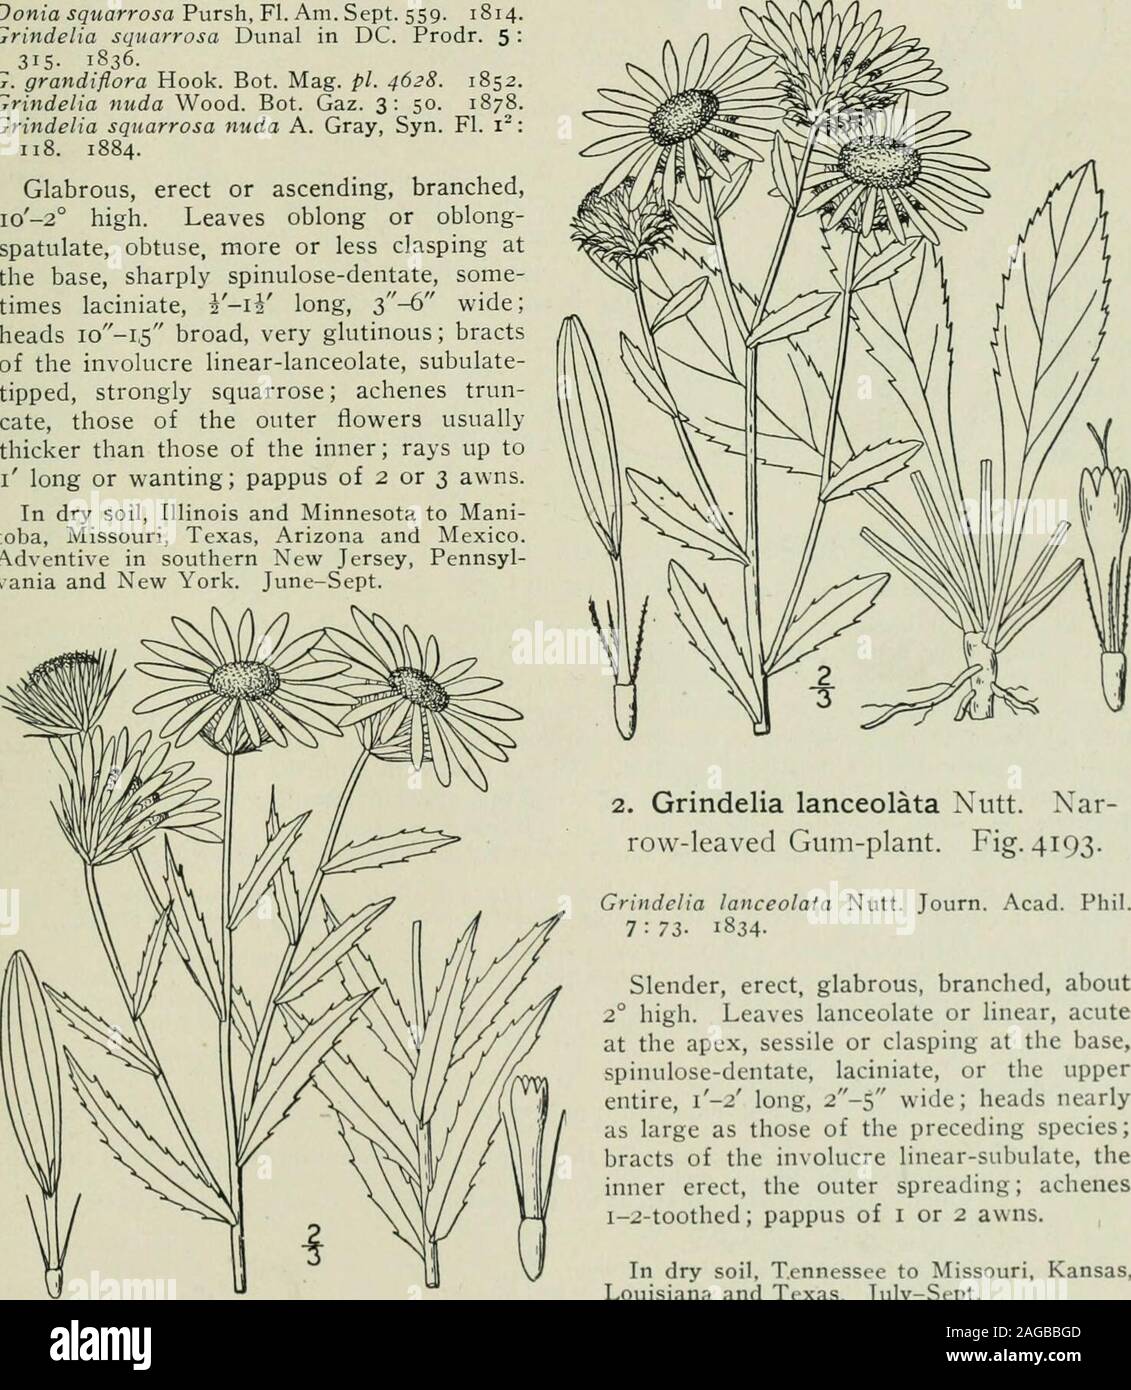 . An illustrated flora of the northern United States, Canada and the British possessions : from Newfoundland to the parallel of the southern boundary of Virginia and from the Atlantic Ocean westward to the 102nd meridian. te; achenes 1-2-toothed ; bracts not squarrose. 2. G. lanceolata. I. Grindelia squarrosa (Pursh) Dunal. Broad-leaved Gum-plant. Fig. 4192. Donia squarrosa Pursh, Fl. Am. Sept. 559. 1814.Grindelia squarrosa Dunal in DC. Prodr. 5 : 315- 1S36.G. grandiflora Hook. Bot. Mag. pi. 4628. 1852.Grindelia nuda Wood. Bot. Gaz. 3: 50. 1878.Grindelia squarrosa nuda A. Gray, Syn. Fl. i: 118 Stock Photo